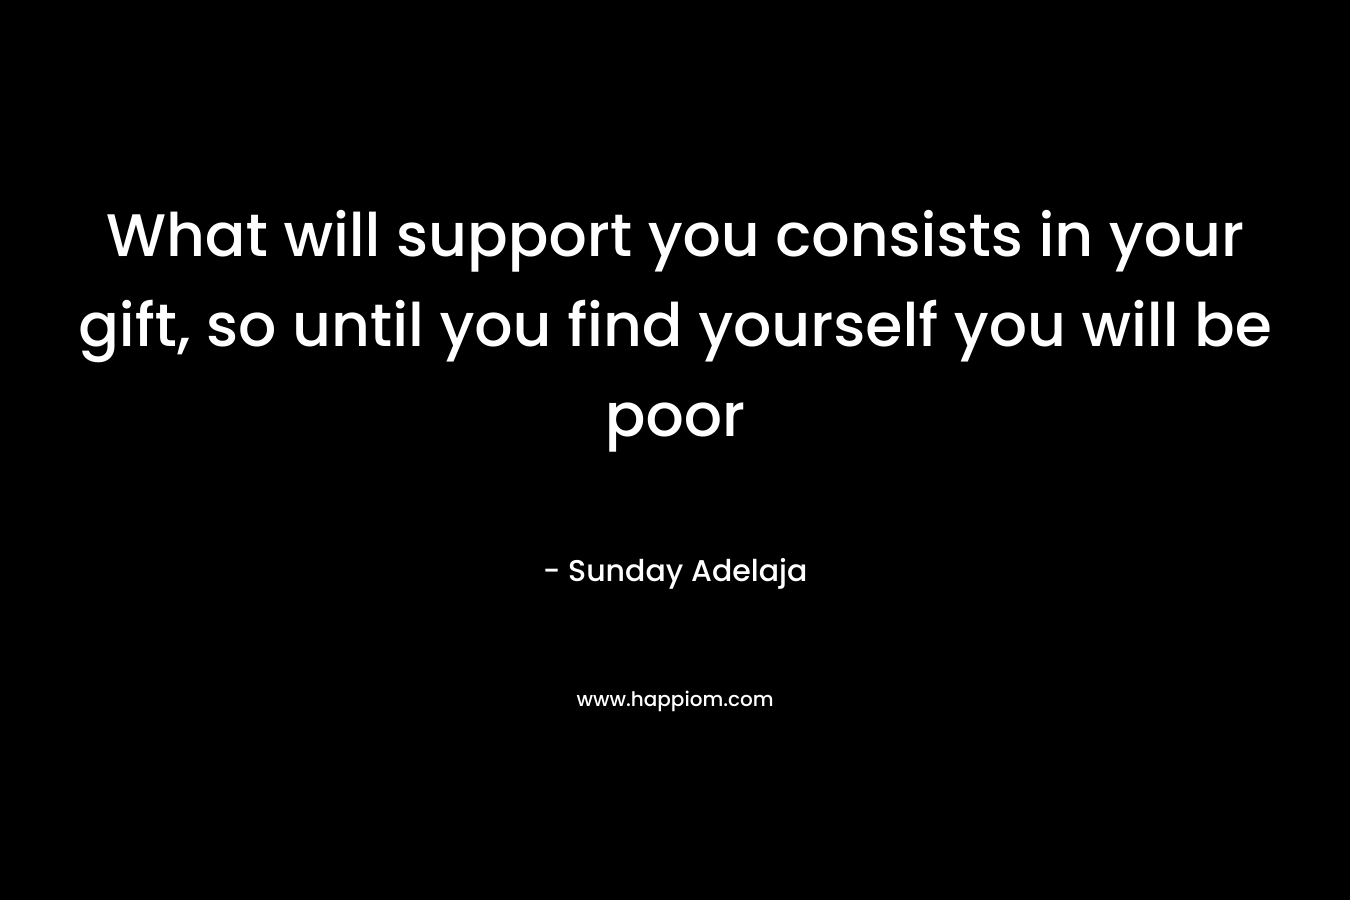 What will support you consists in your gift, so until you find yourself you will be poor